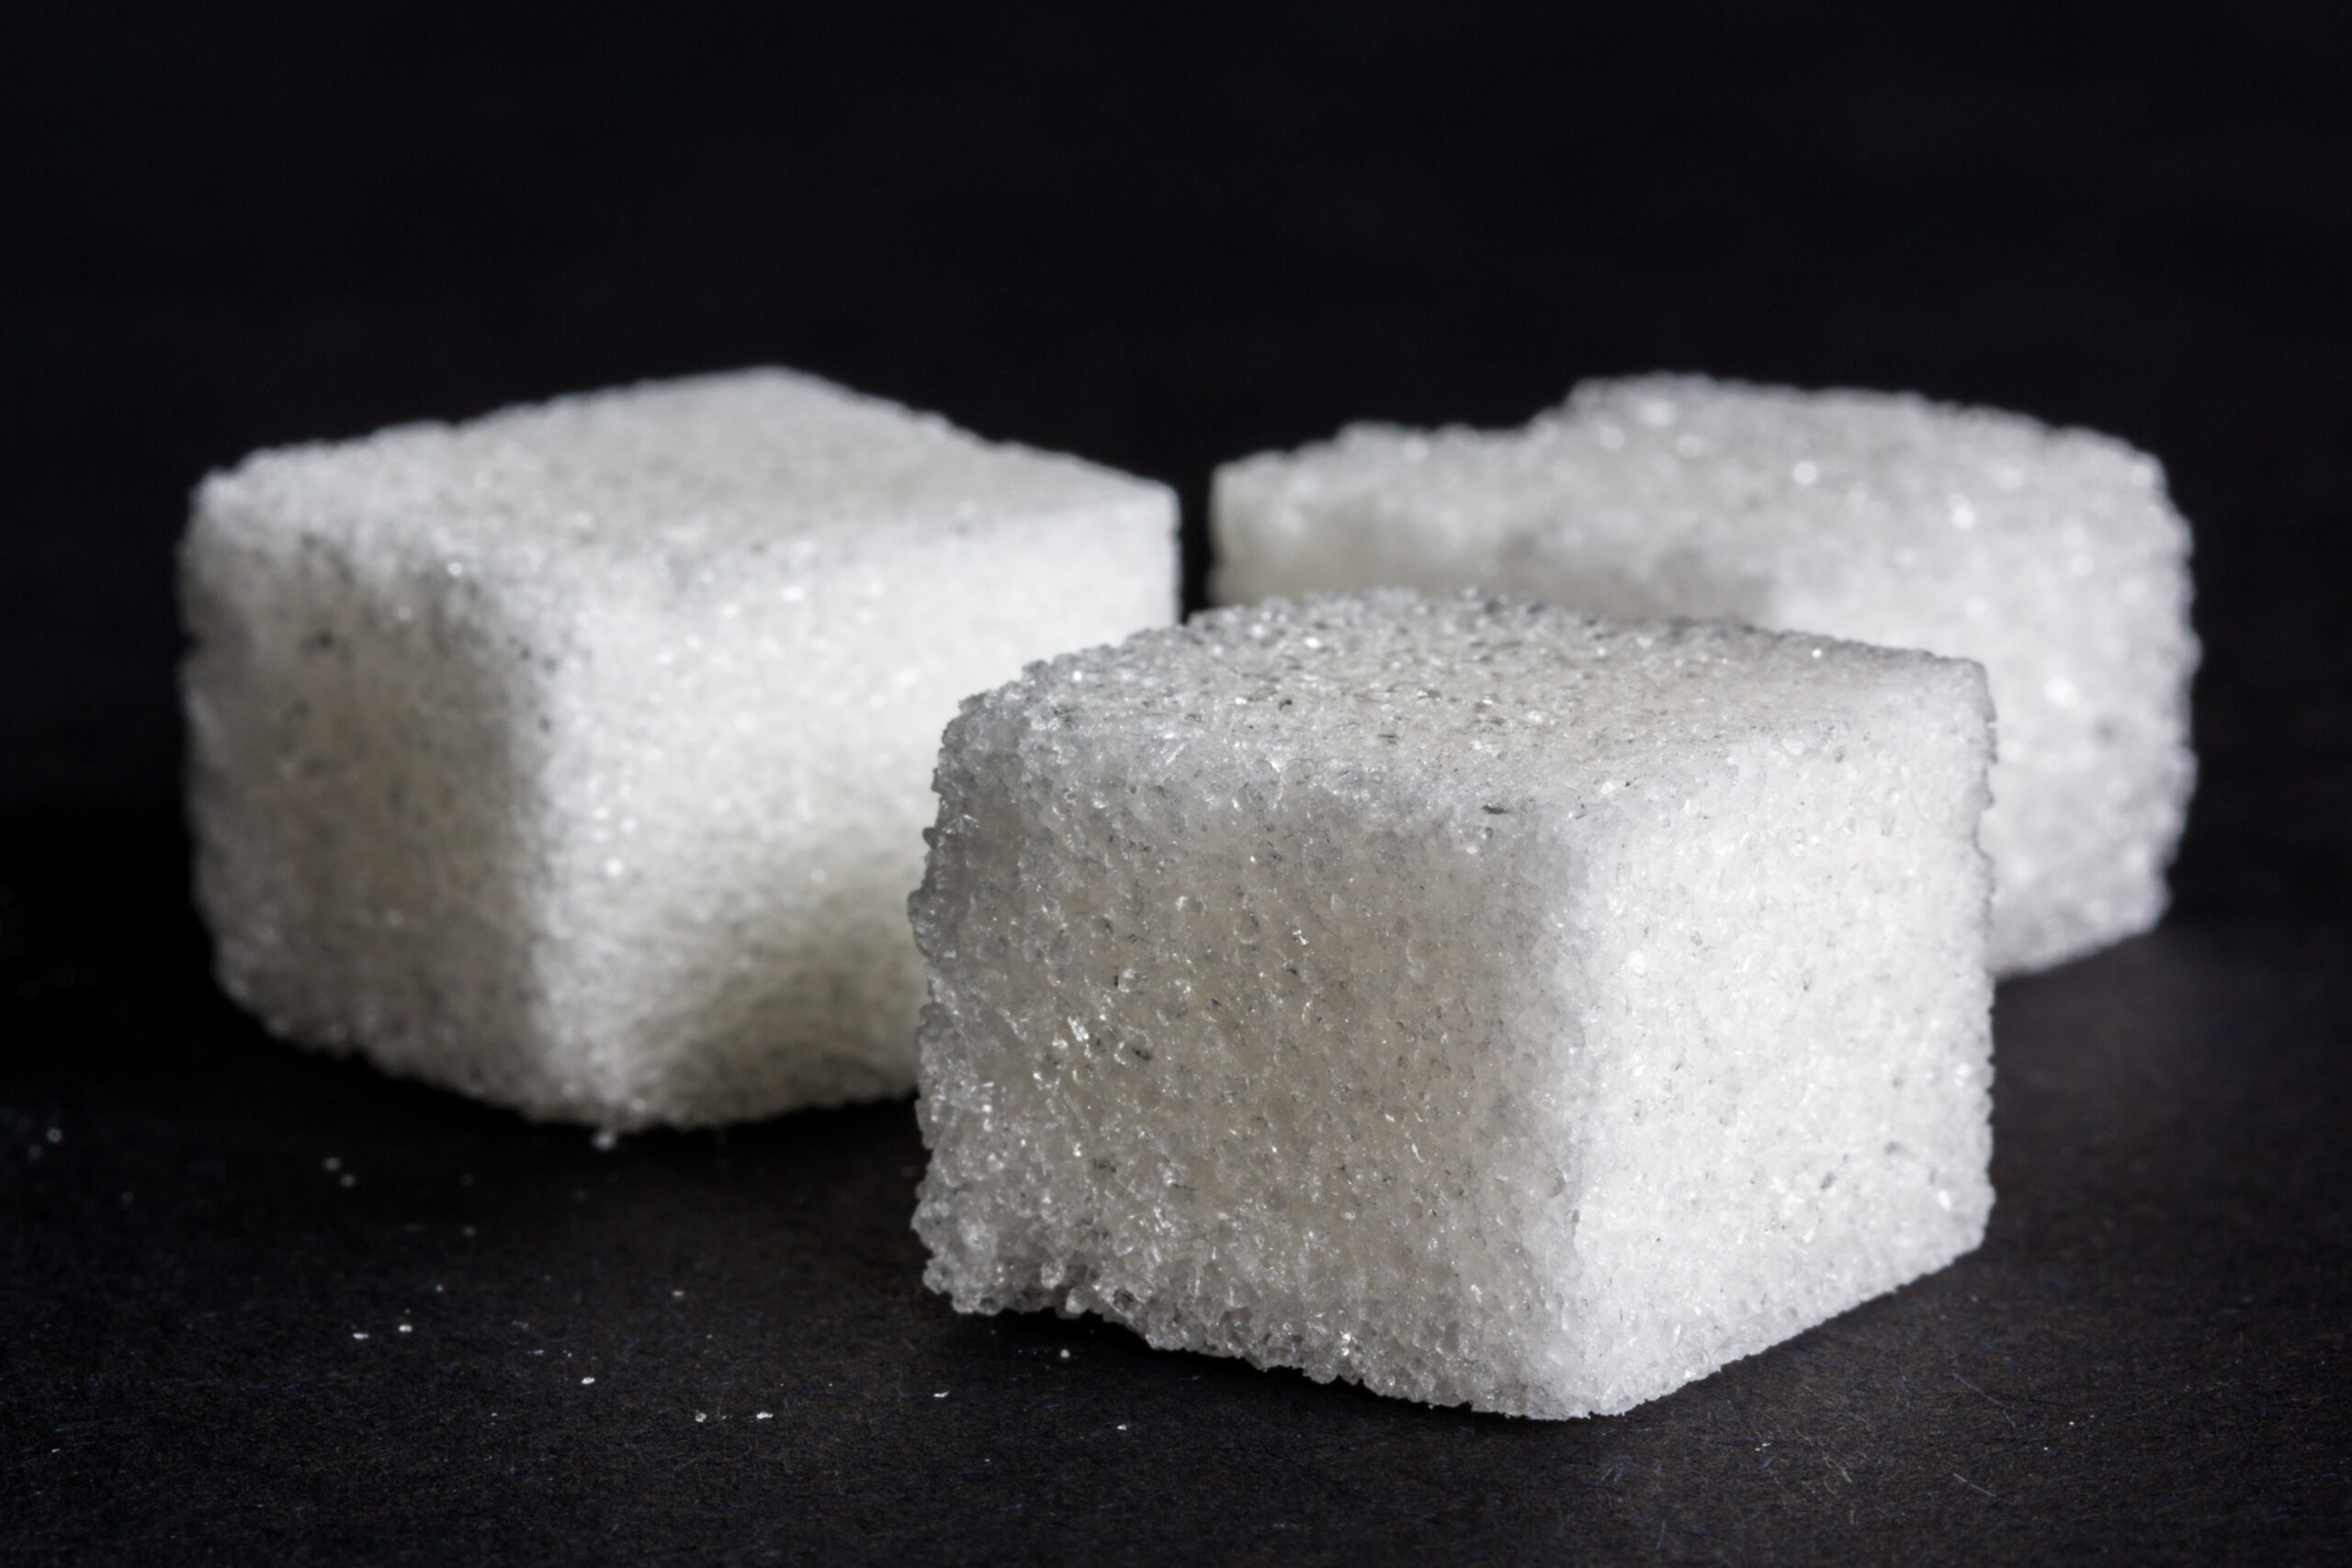 Another Old-Fashioned Controversy: What About That Muddled Sugar Cube? 